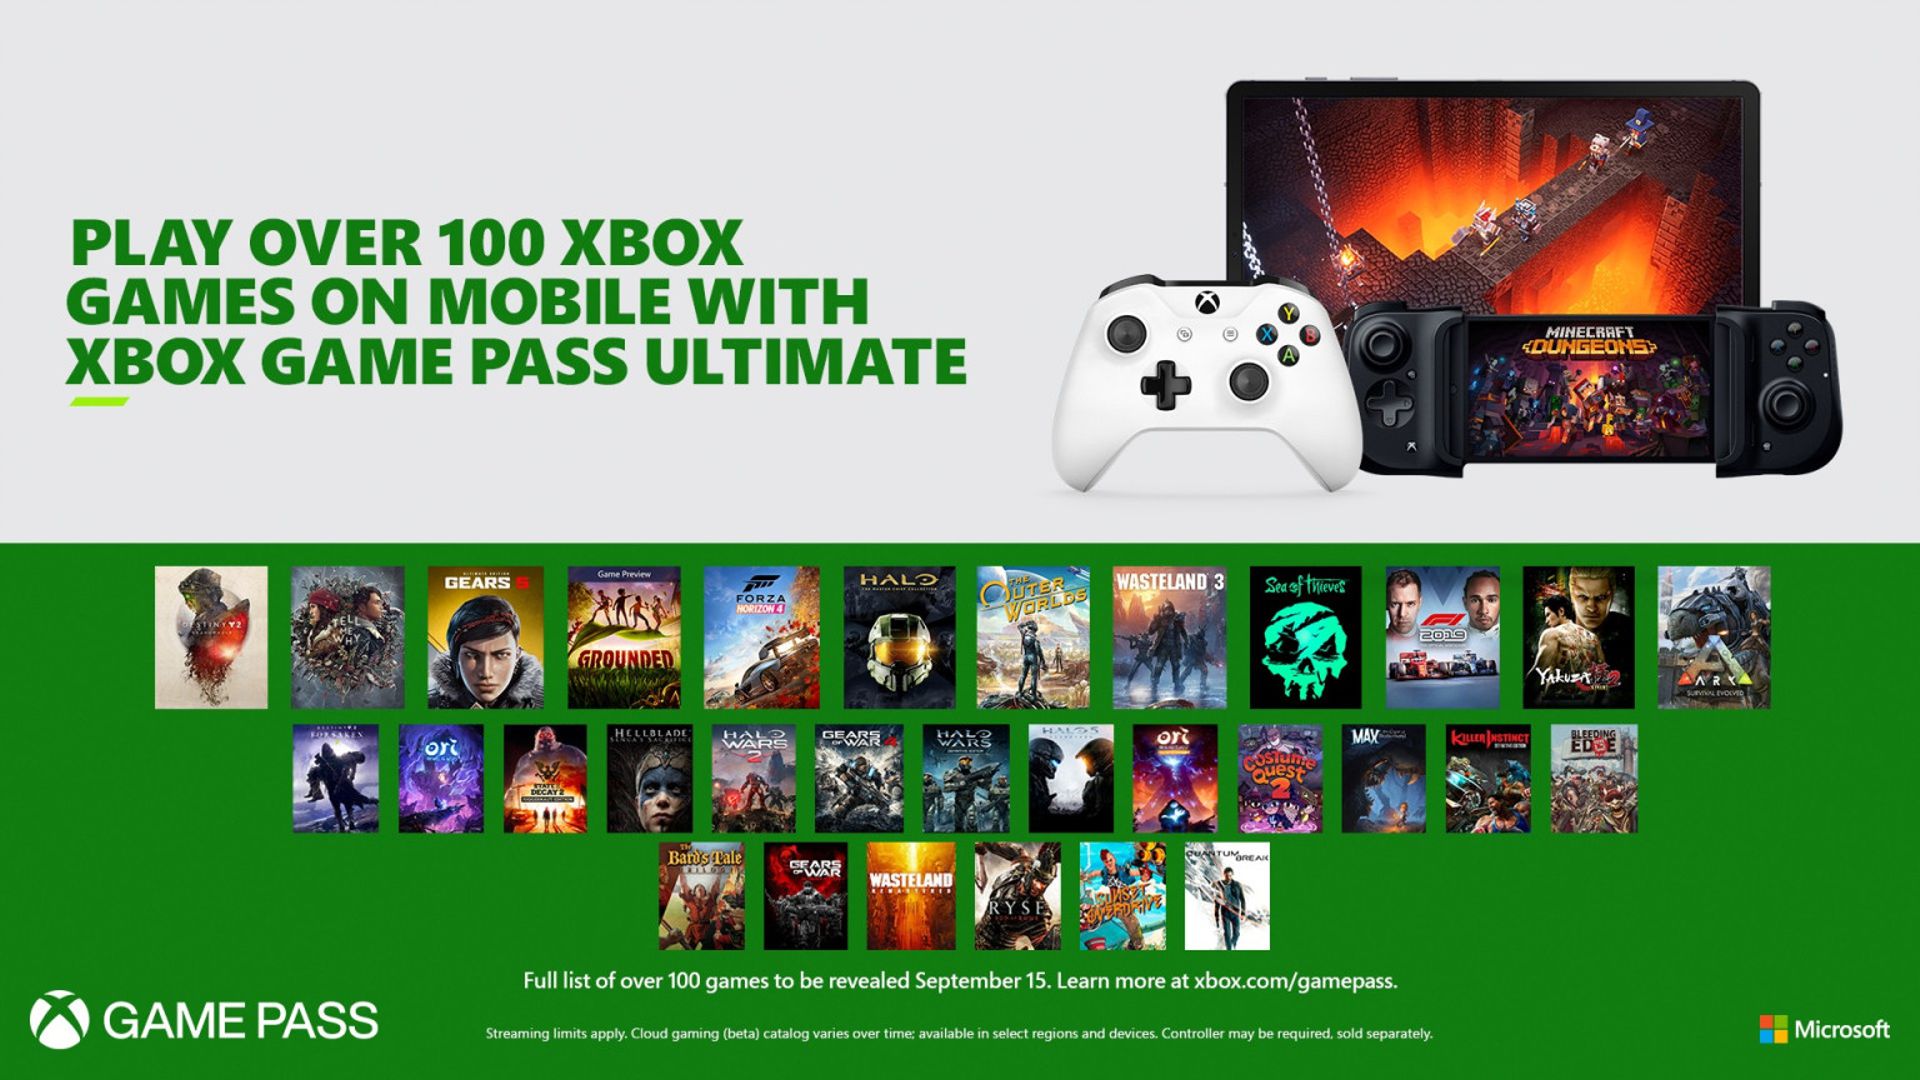 Xbox Game Pass Ultimate - Project xCloud